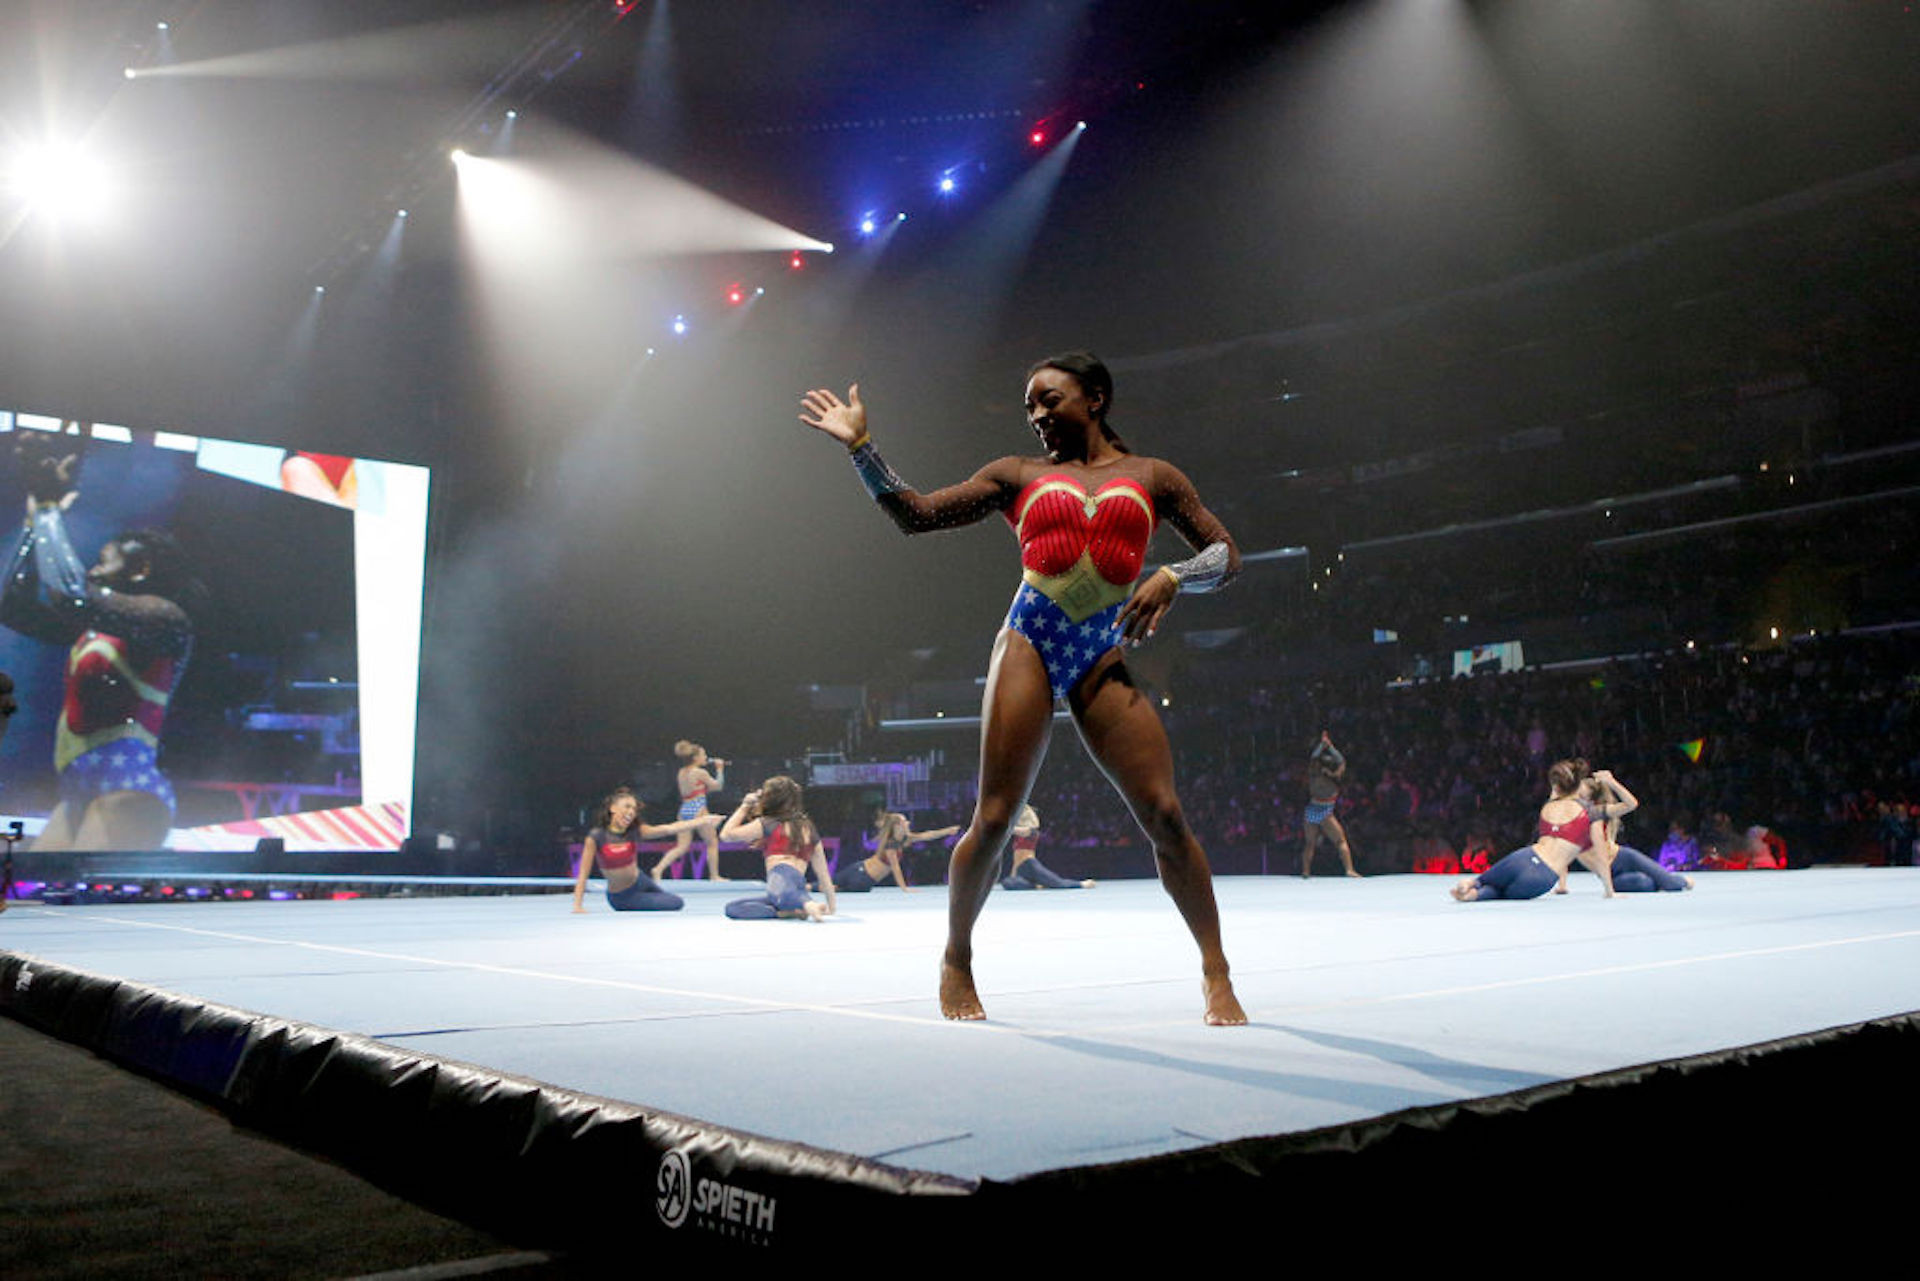 Simone Biles brings back GOAT, with men this time